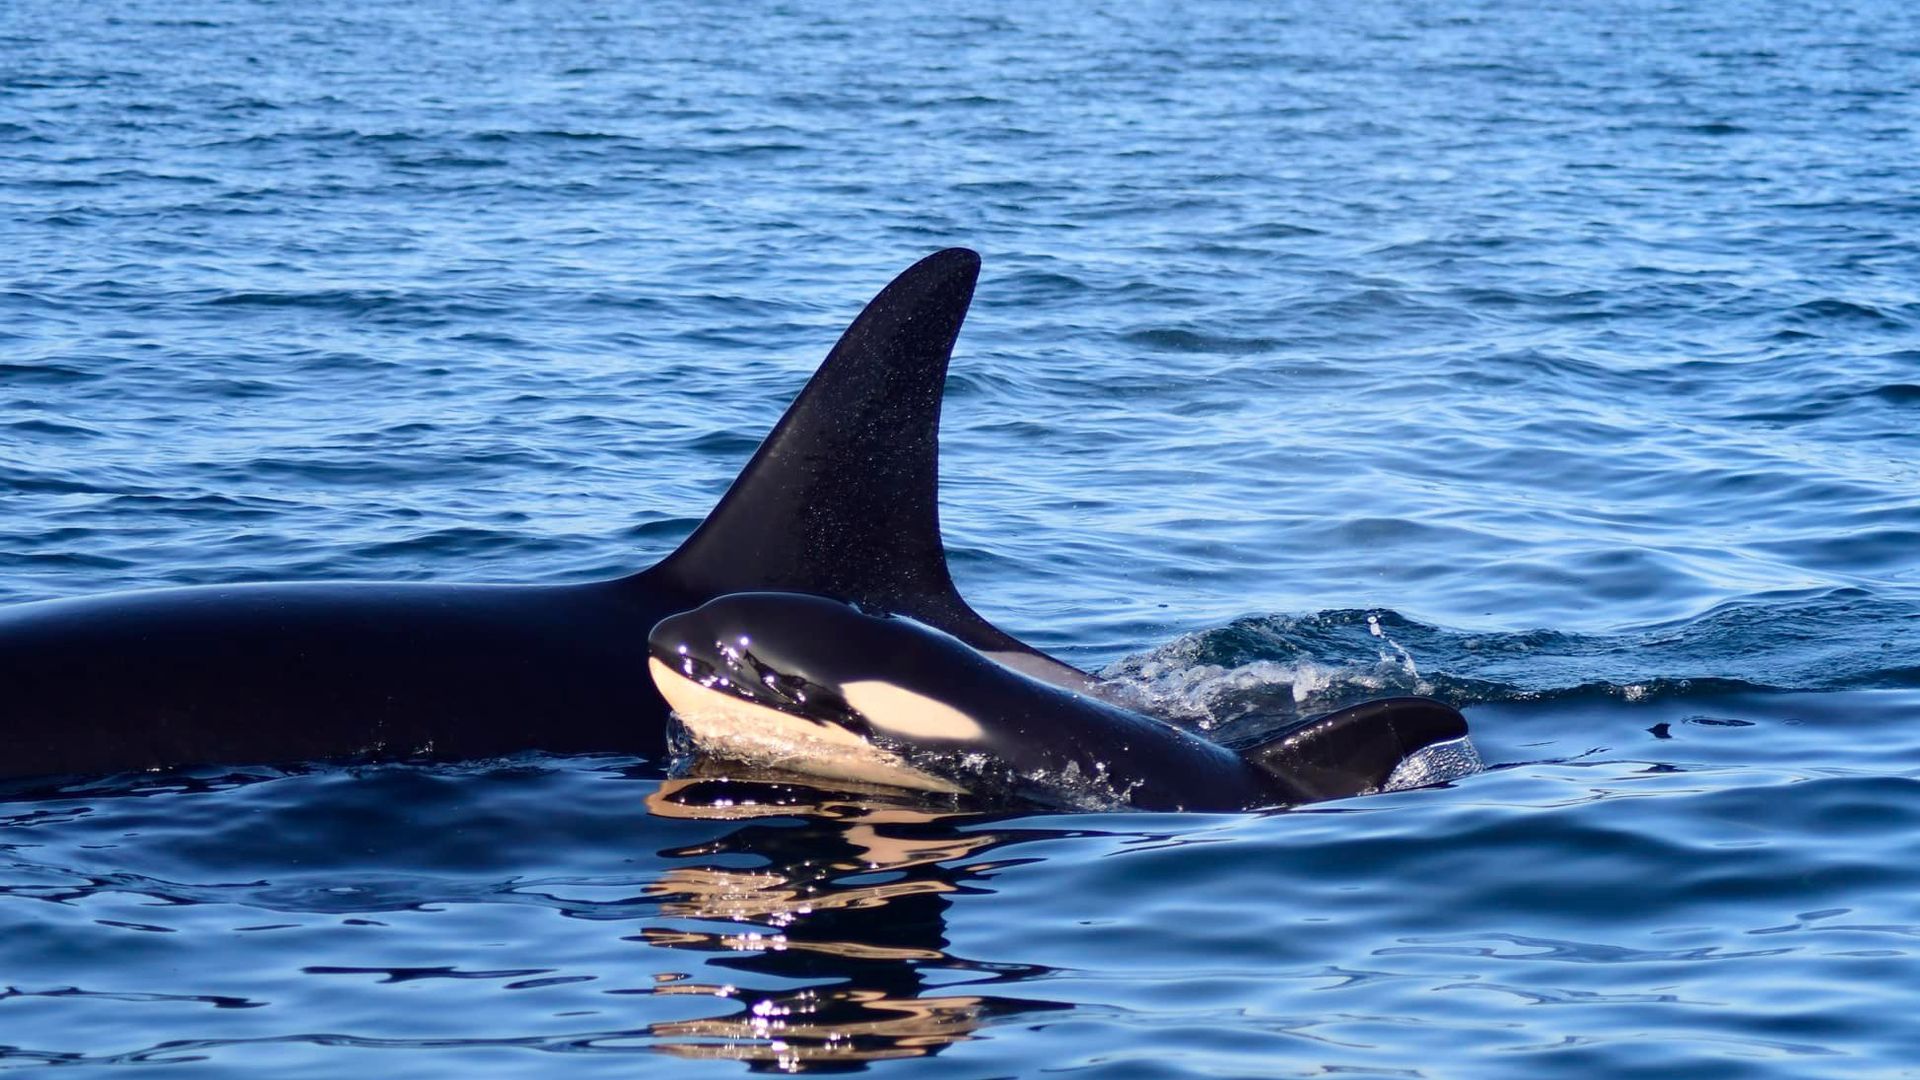 A photo of a brand new black and white baby orca swimming next to a bigger whale near Seattle. 